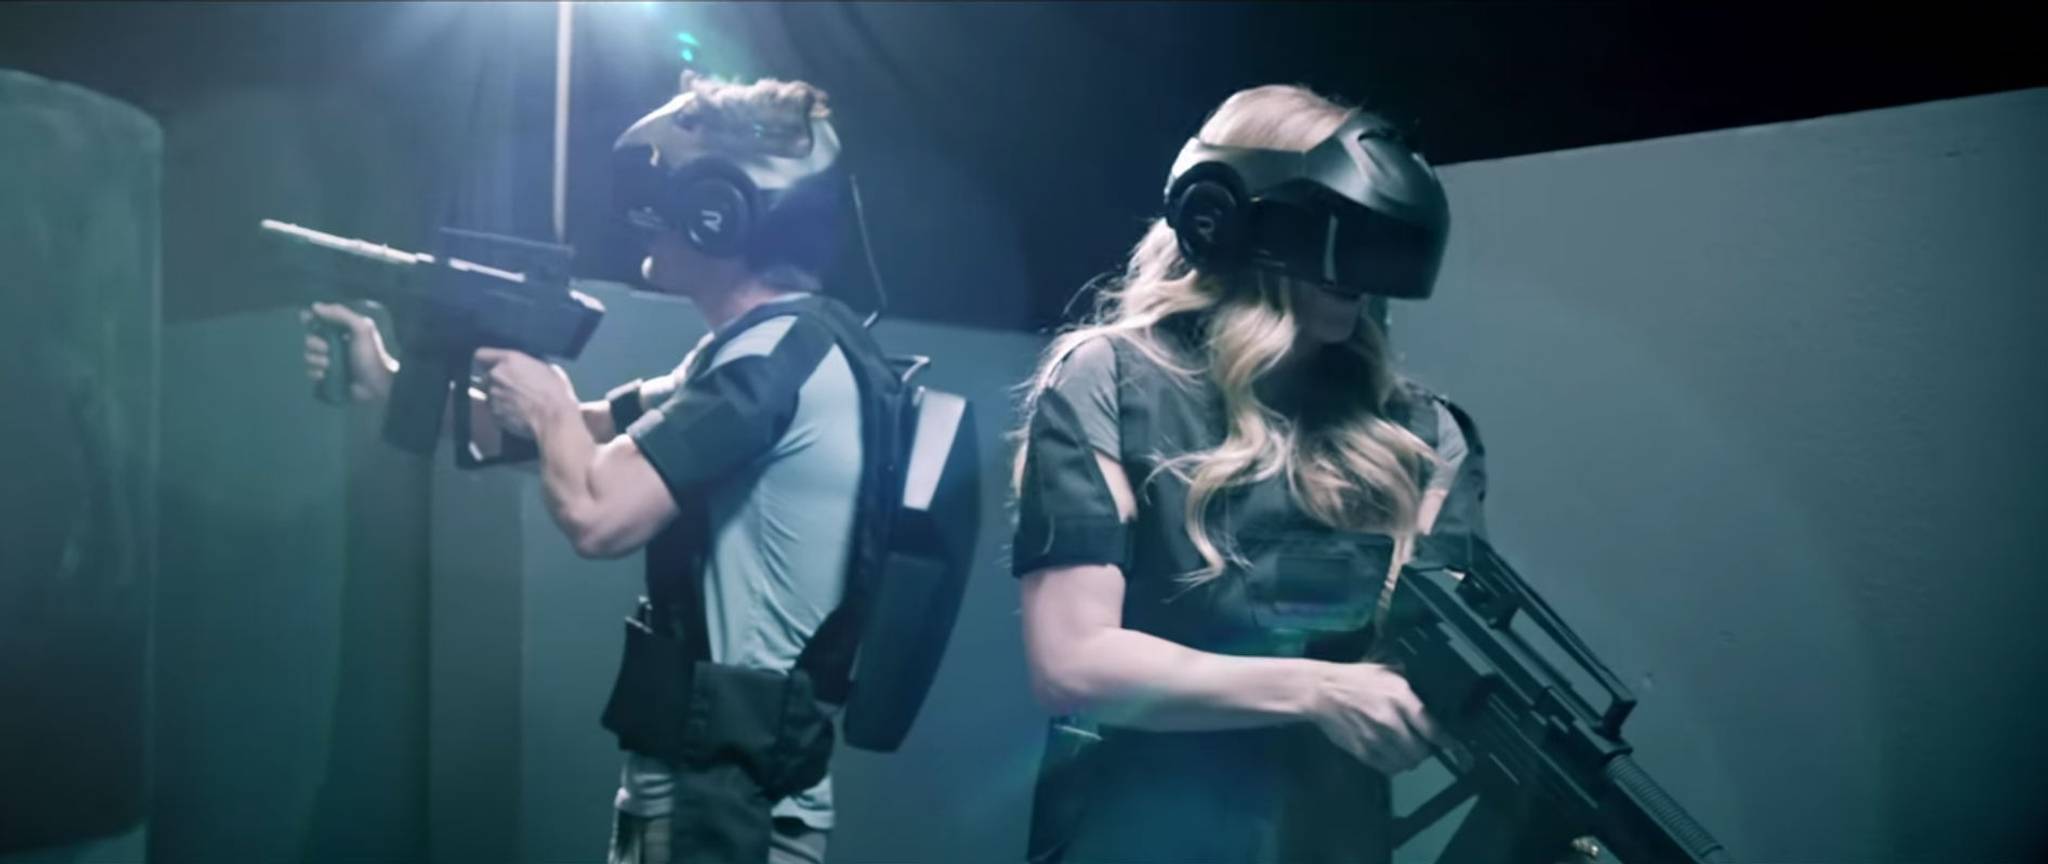 Playing in a virtual reality theme park